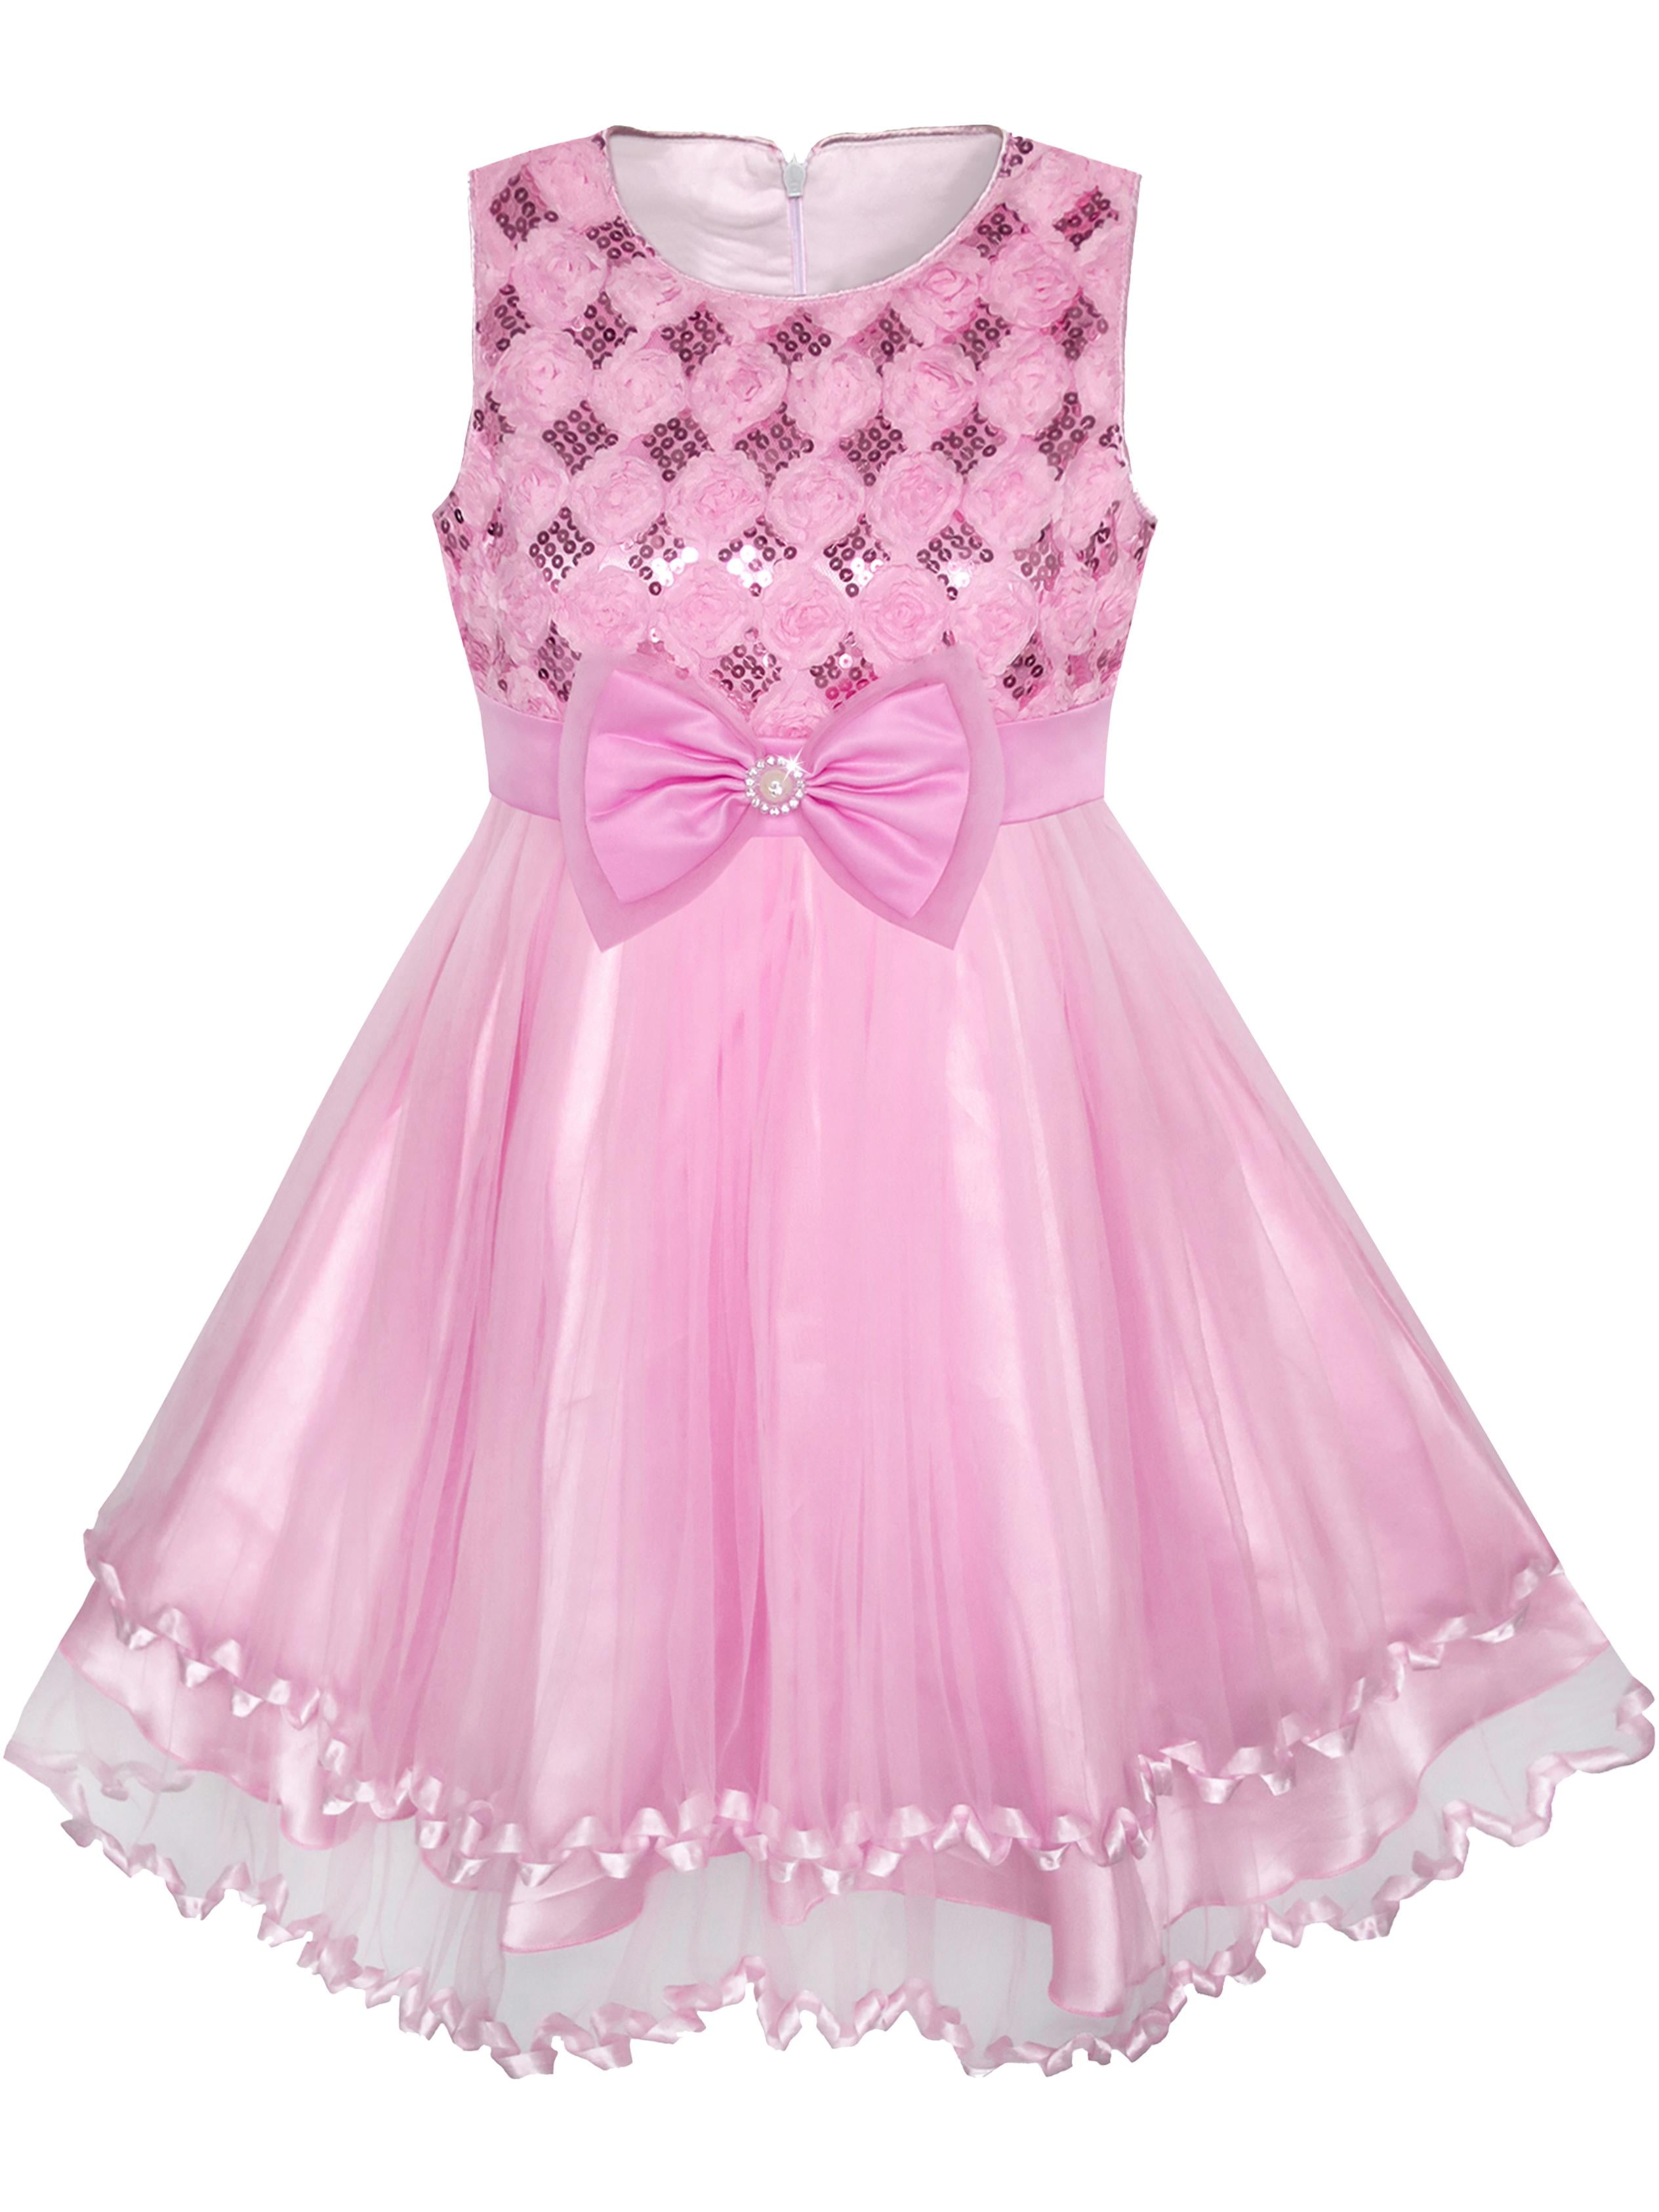 Girls Dress Sequin Sparkling Bow Tie Tulle Party Pageant 7-8 - Walmart.com